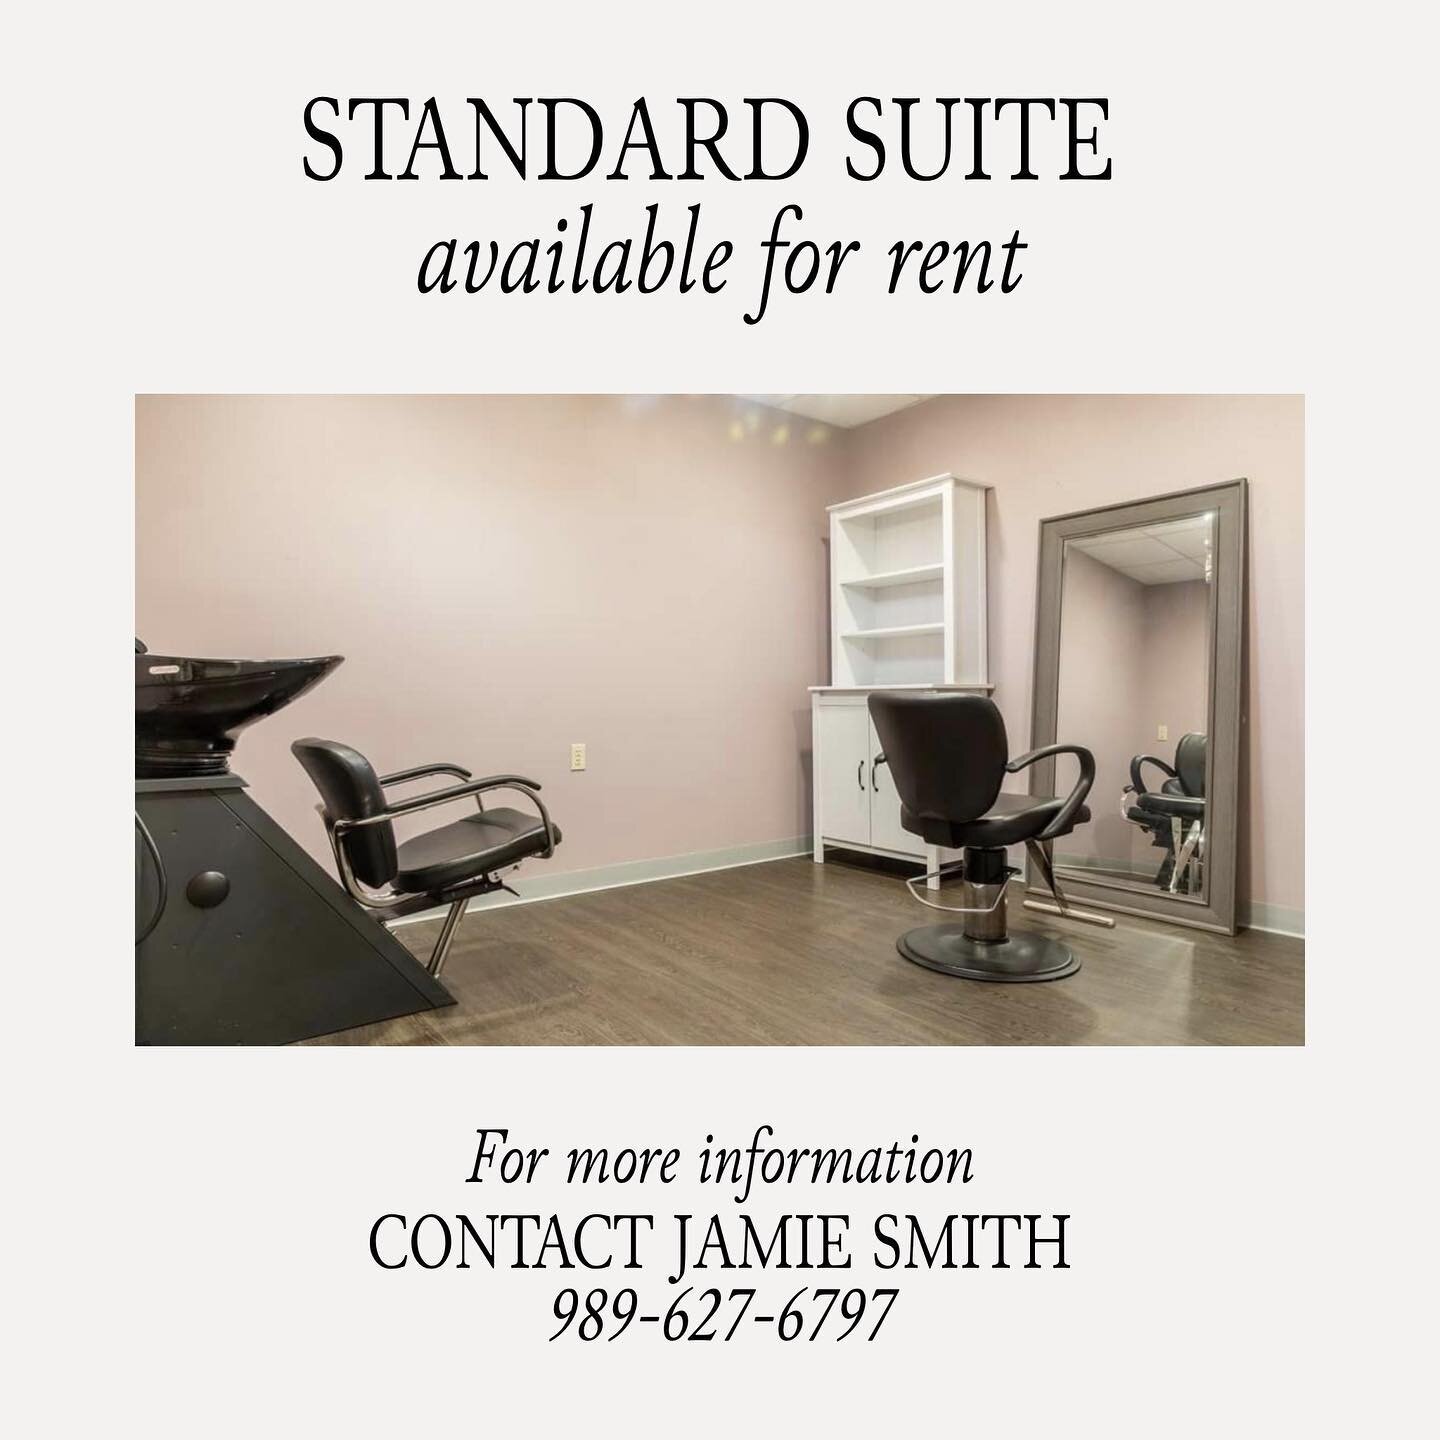 ✨Turn your dream of owning your own salon into a reality✨

📞 Contact Jamie Smith for more information 989-627-6797

#citysuitessalonandspas #salonsuite #owosso #ownyourown